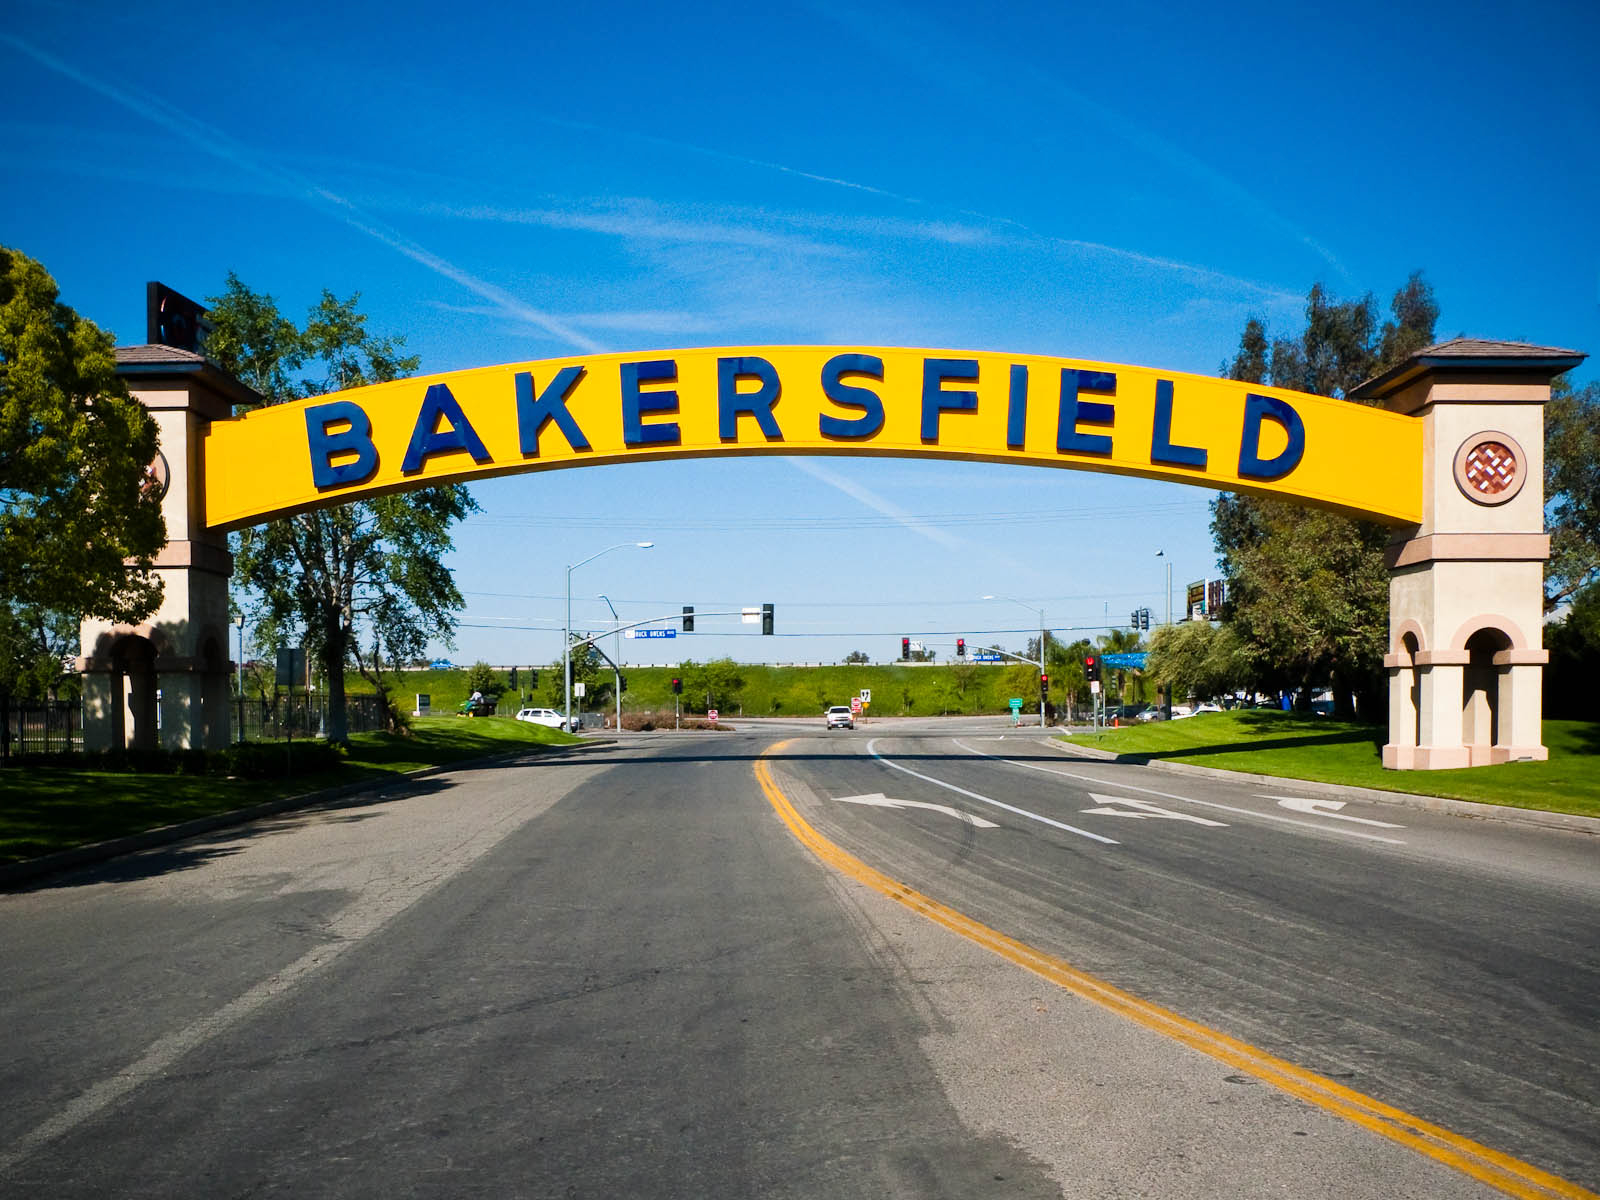 Bakersfield Local Area that offer bail bonds